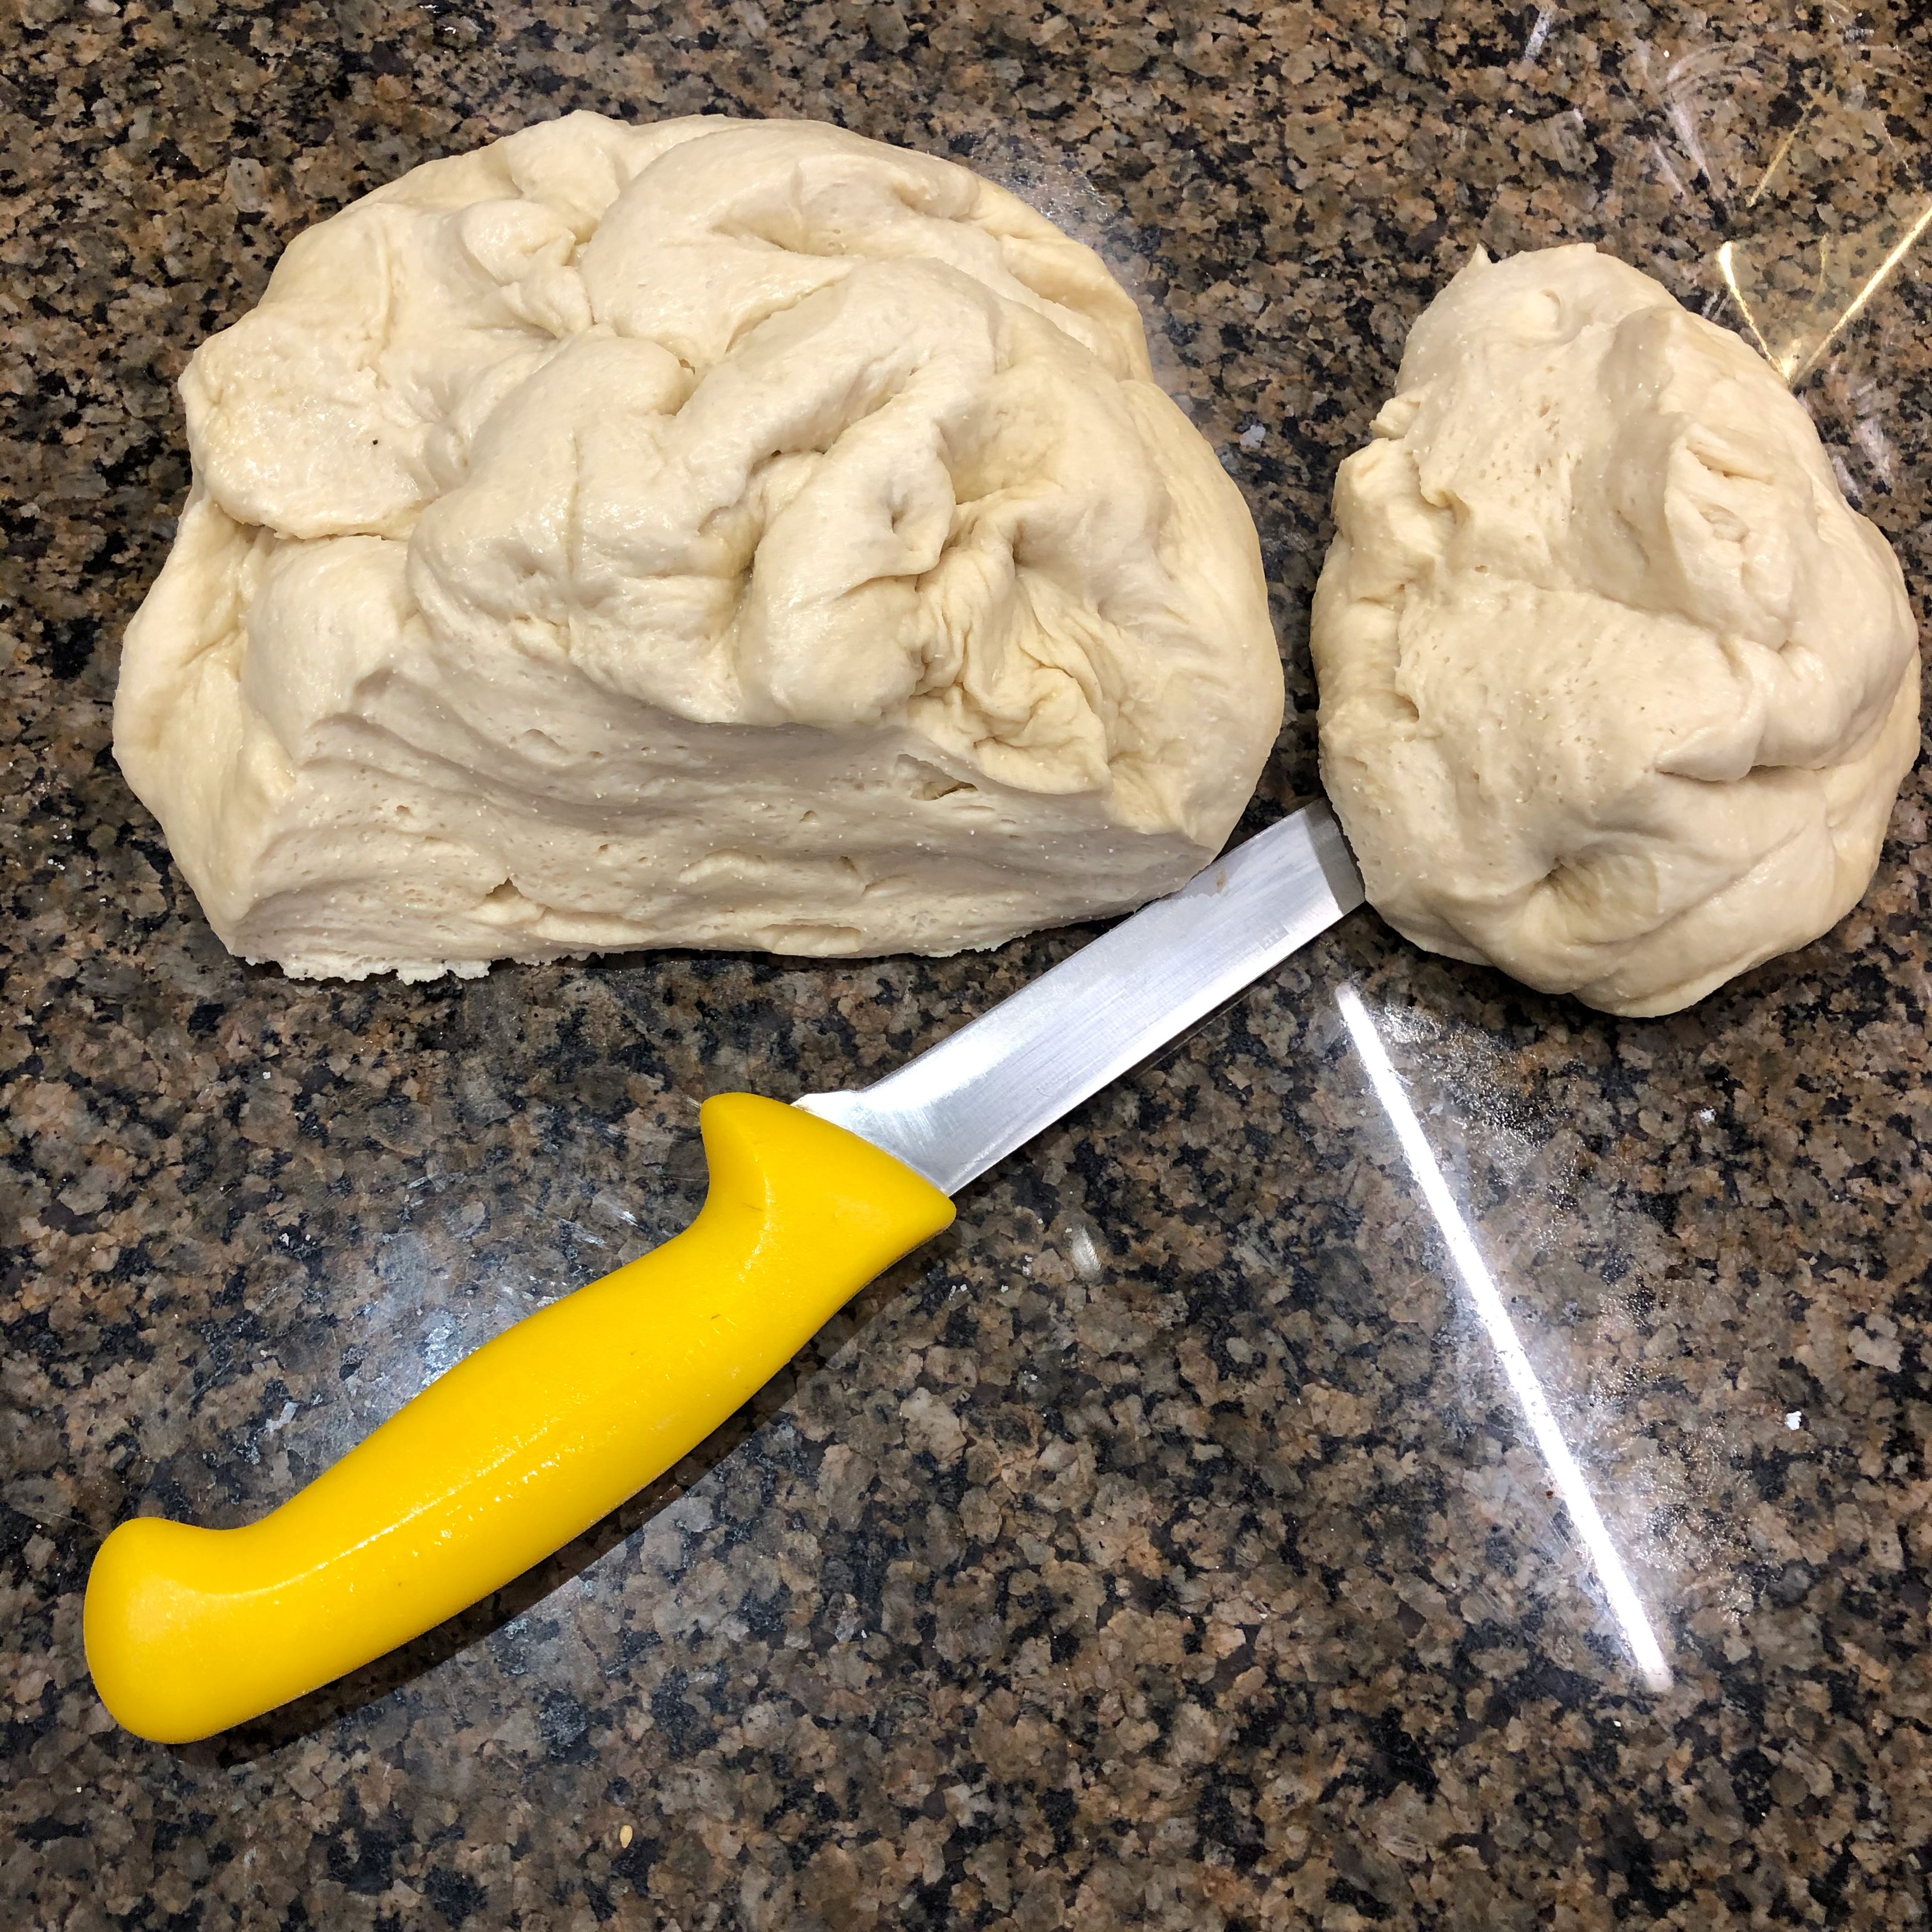 Remove 1/3 of lump of dough and set aside.